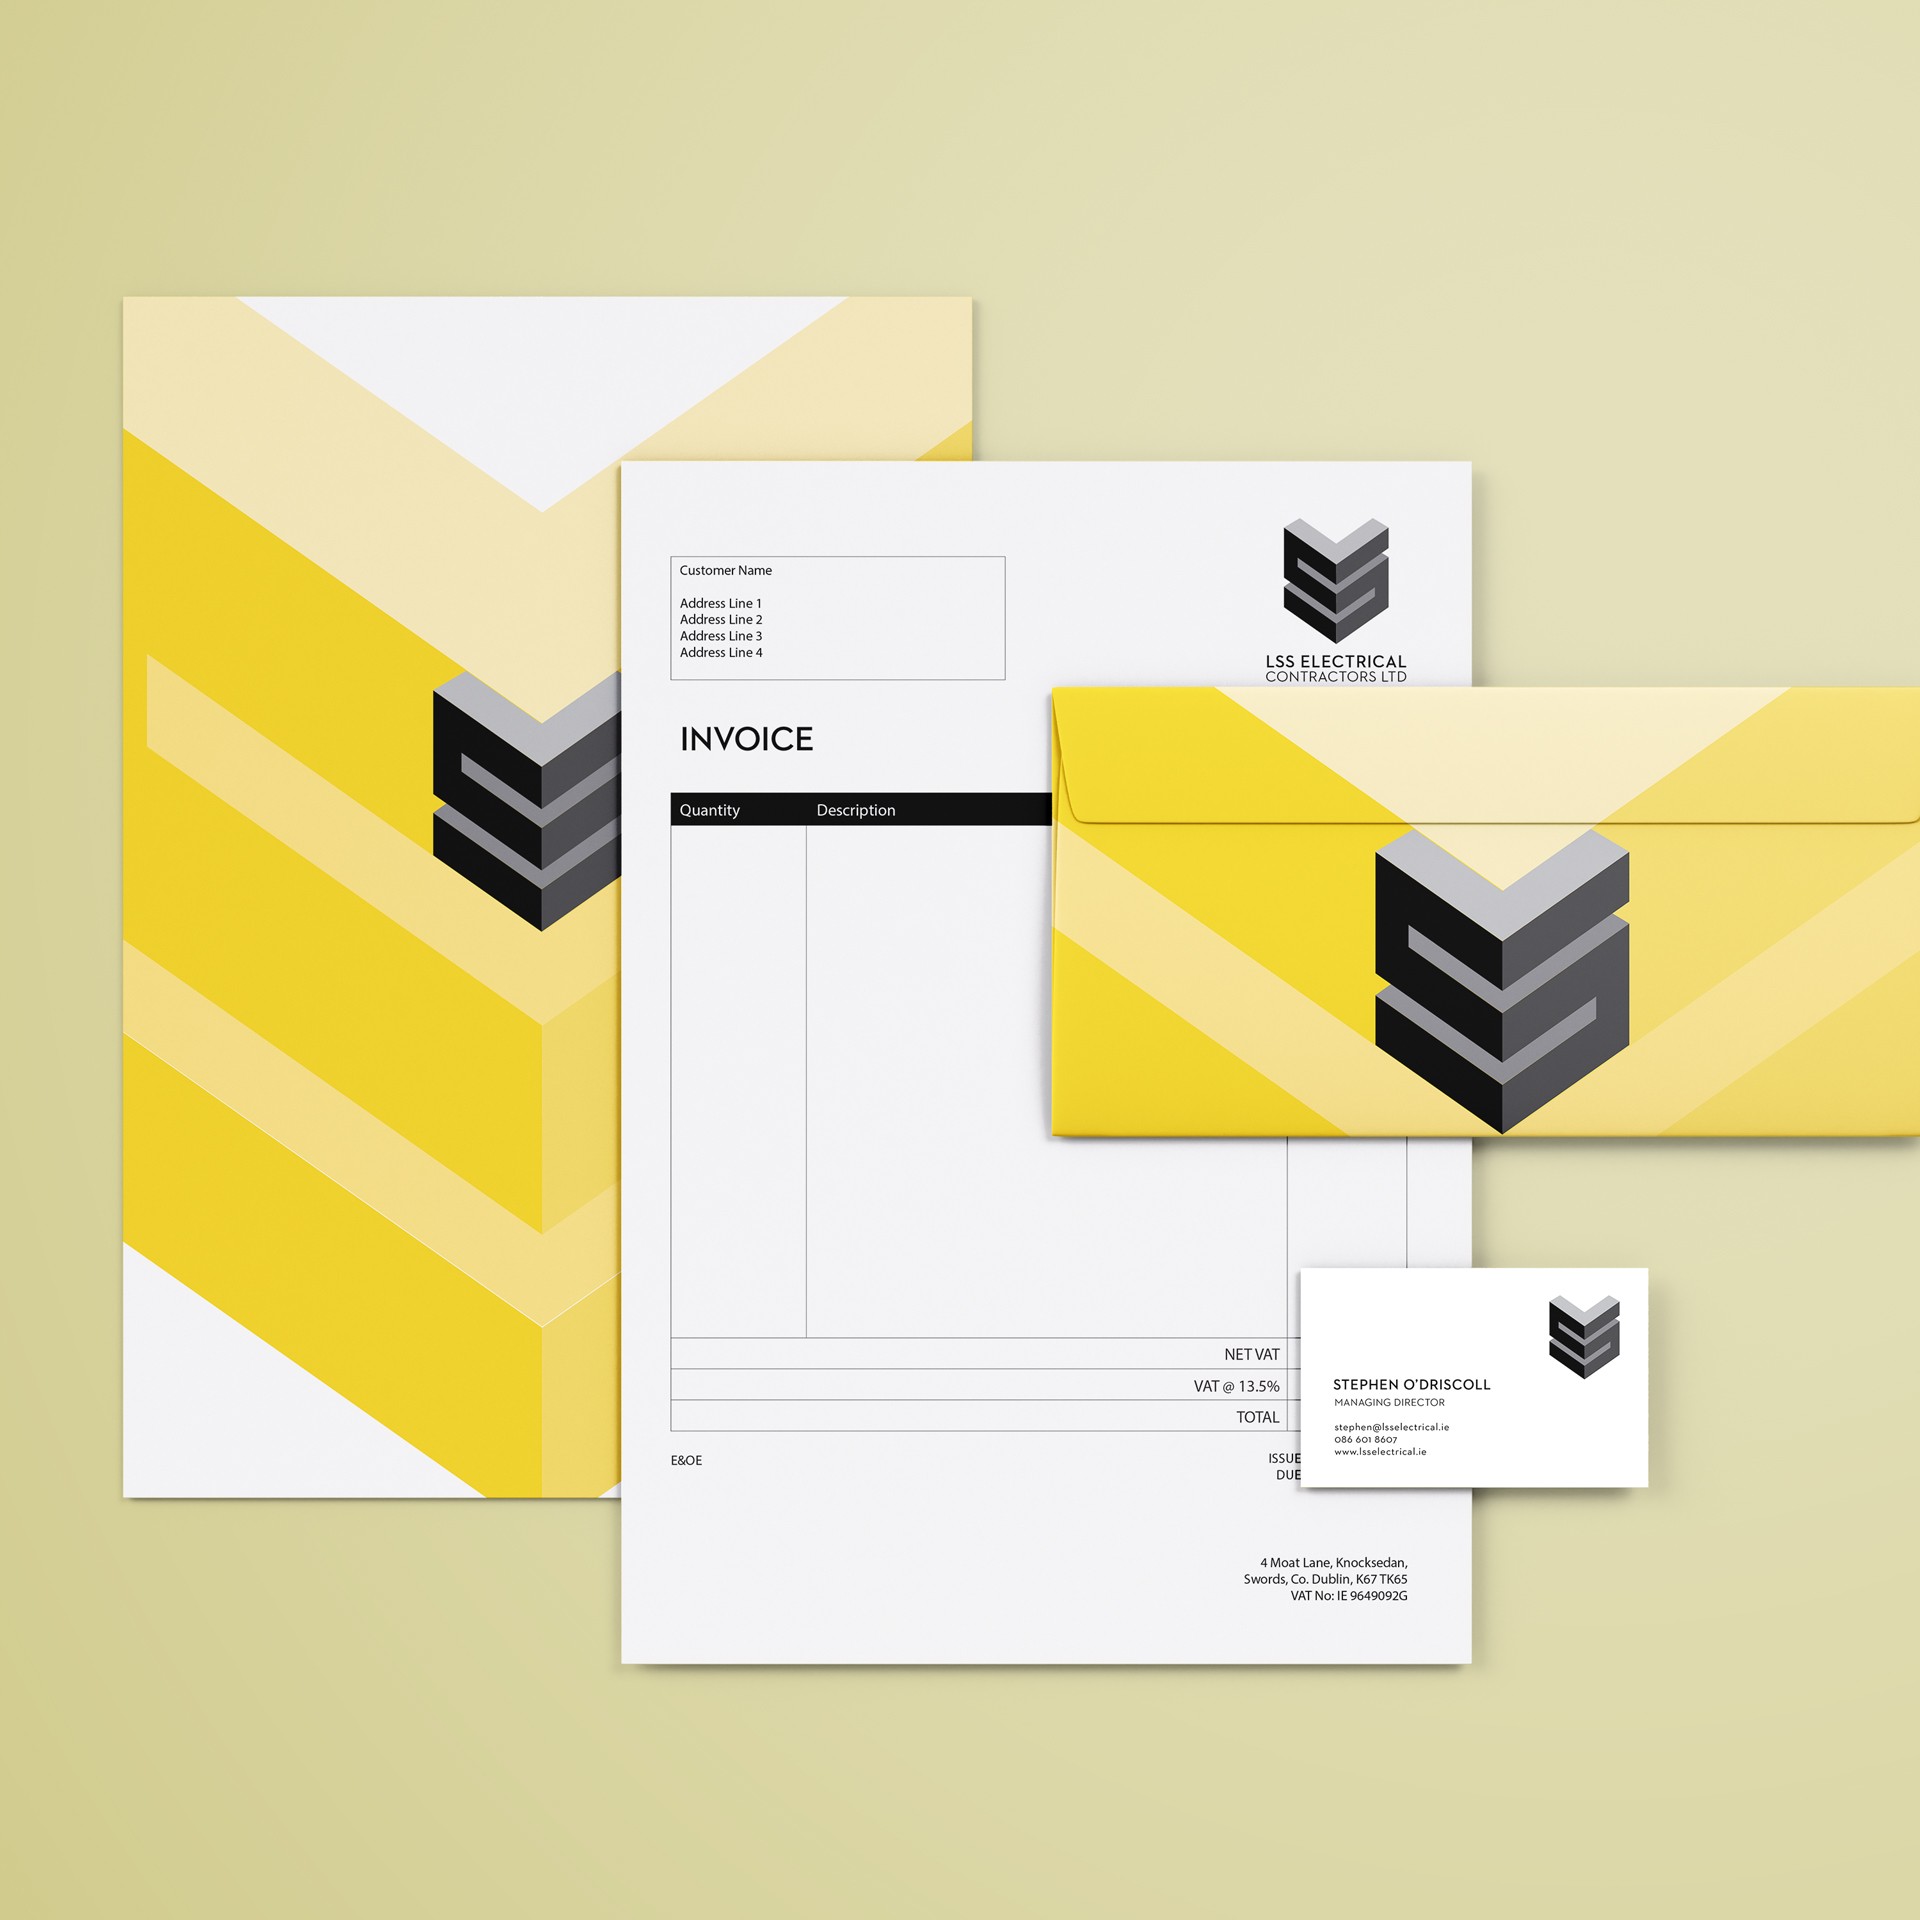 LSS ELECTRICAL STATIONERY mockup